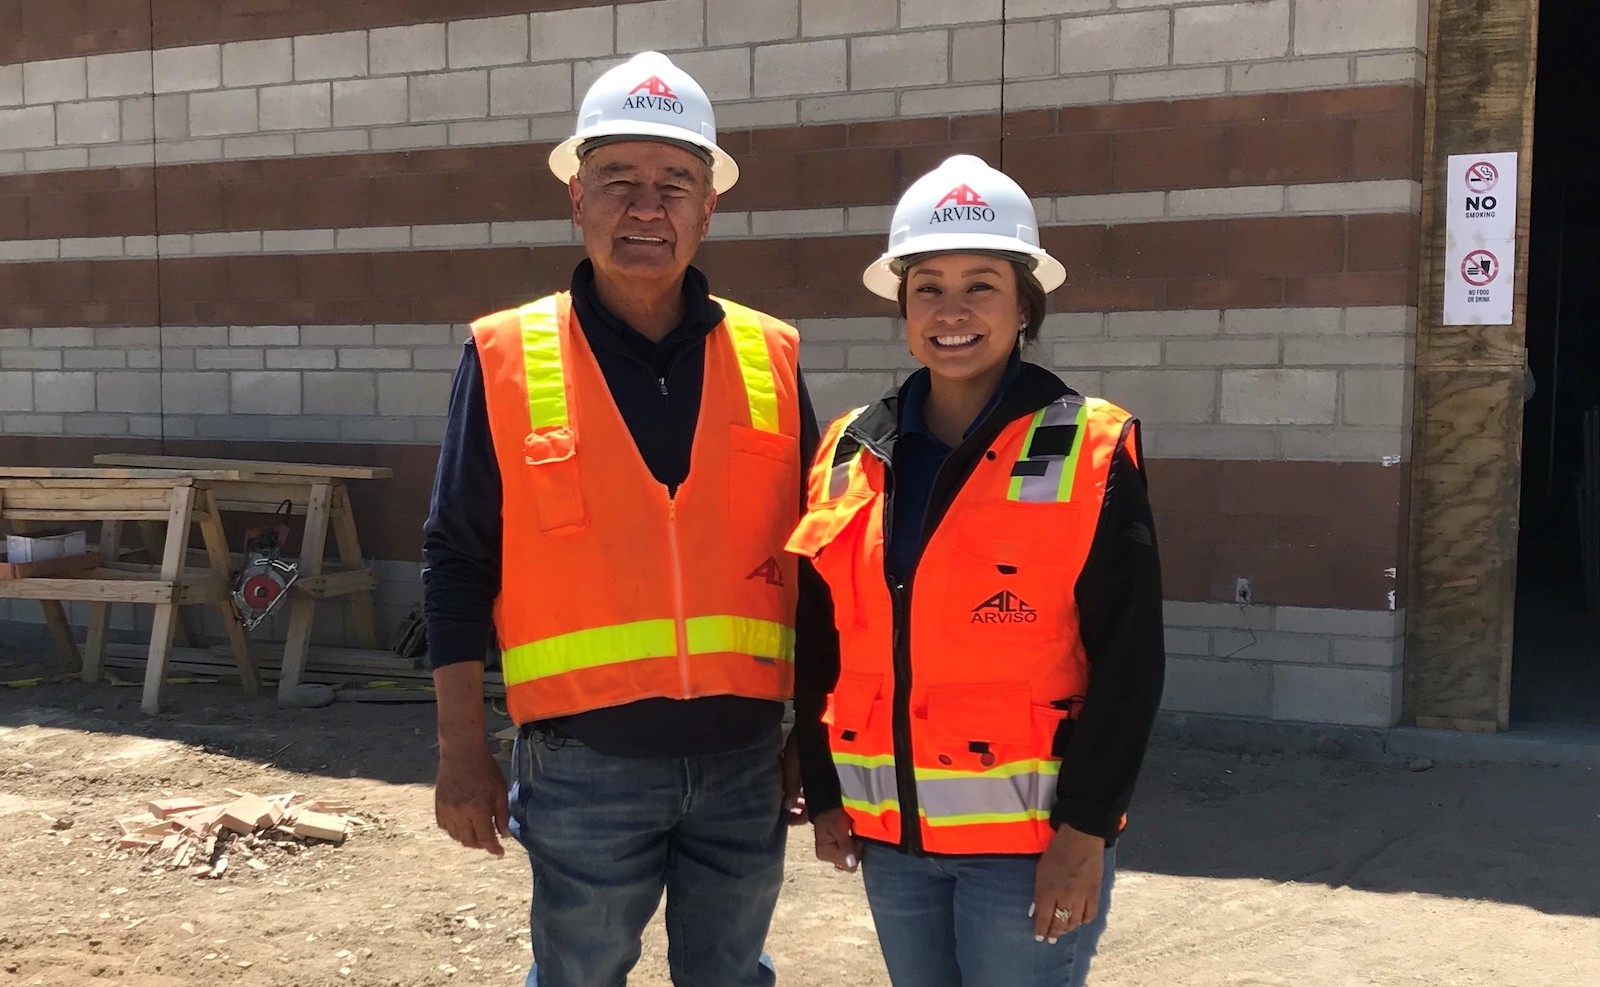 Brianne Arviso and father, Olsen Arviso, Jr., Arviso Construction Company